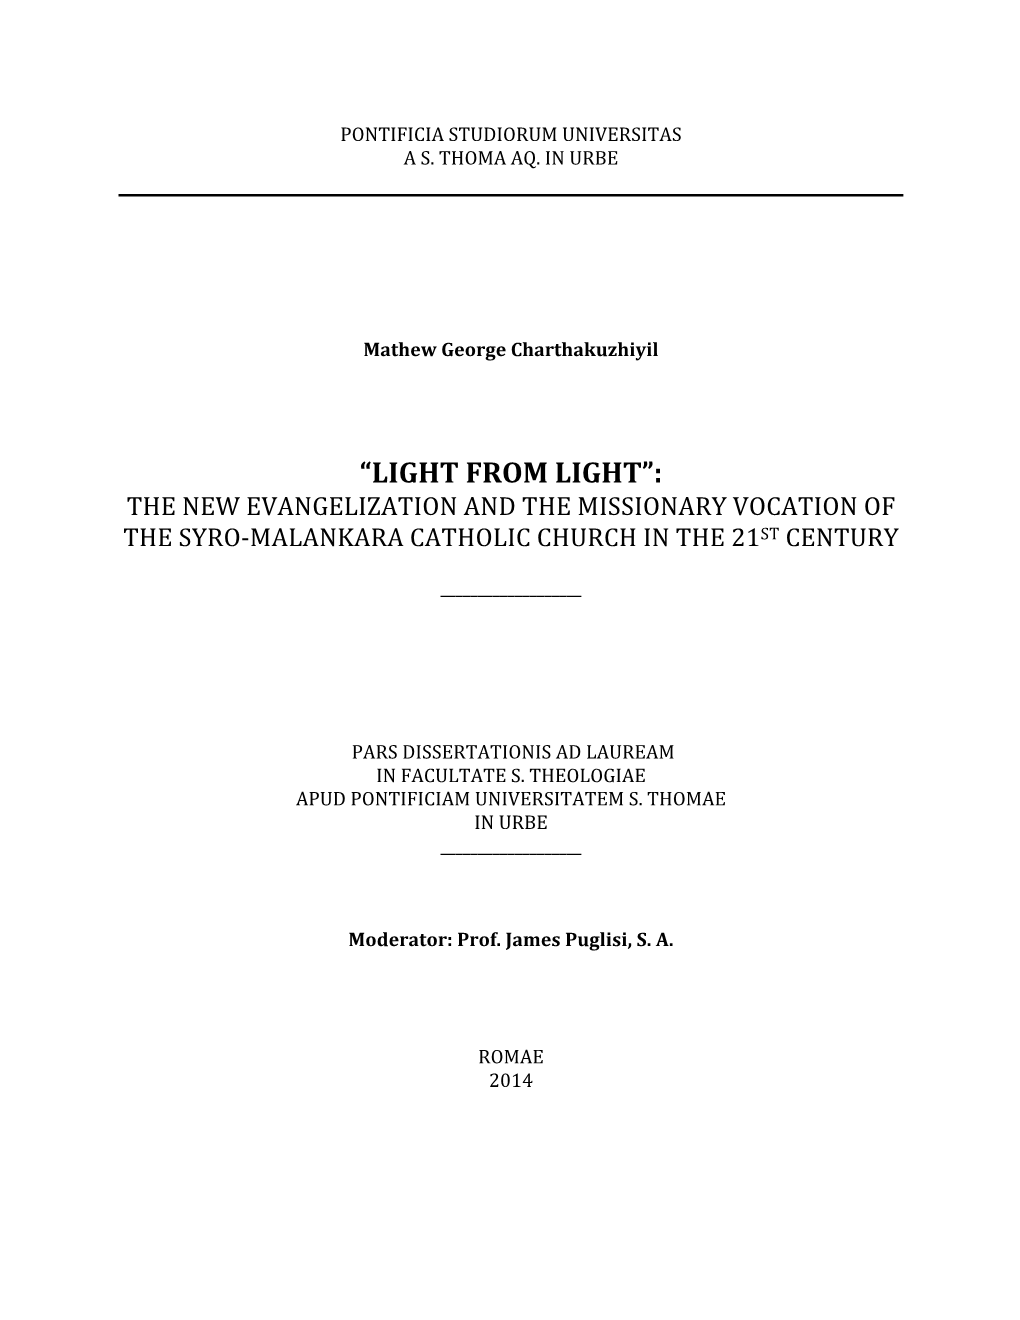 “Light from Light”: the New Evangelization and the Missionary Vocation of the Syro-Malankara Catholic Church in the 21St Century